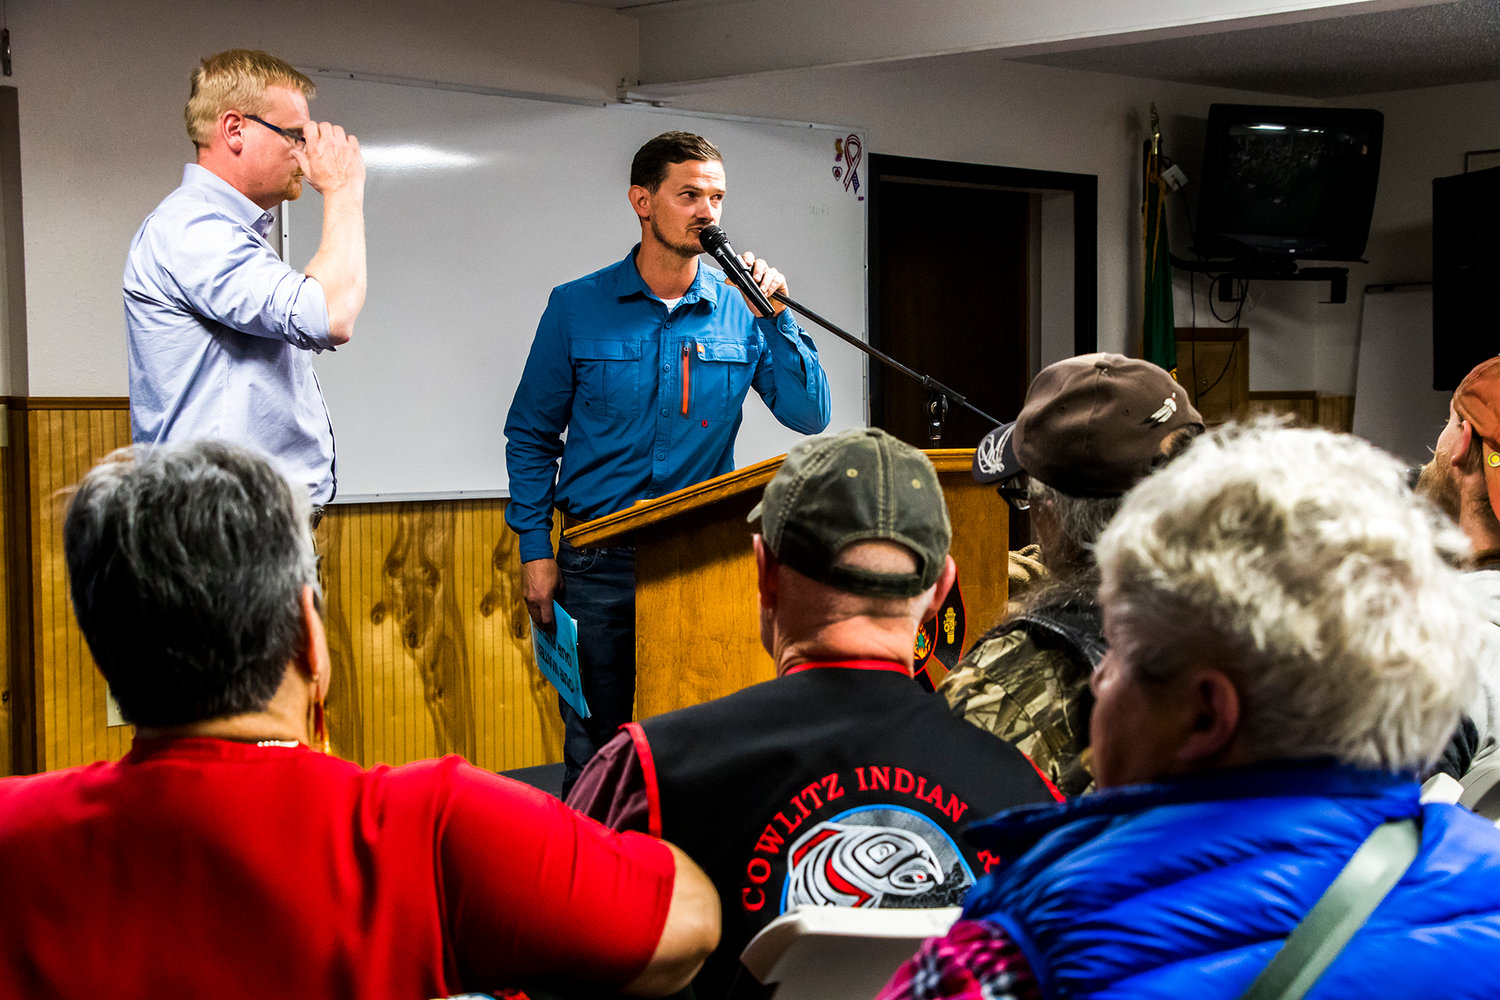 Local resident Craig Jasmer, center, addresses a packed town hall in Randle about a proposed water bottling plant that has drawn strong opposition in the community.